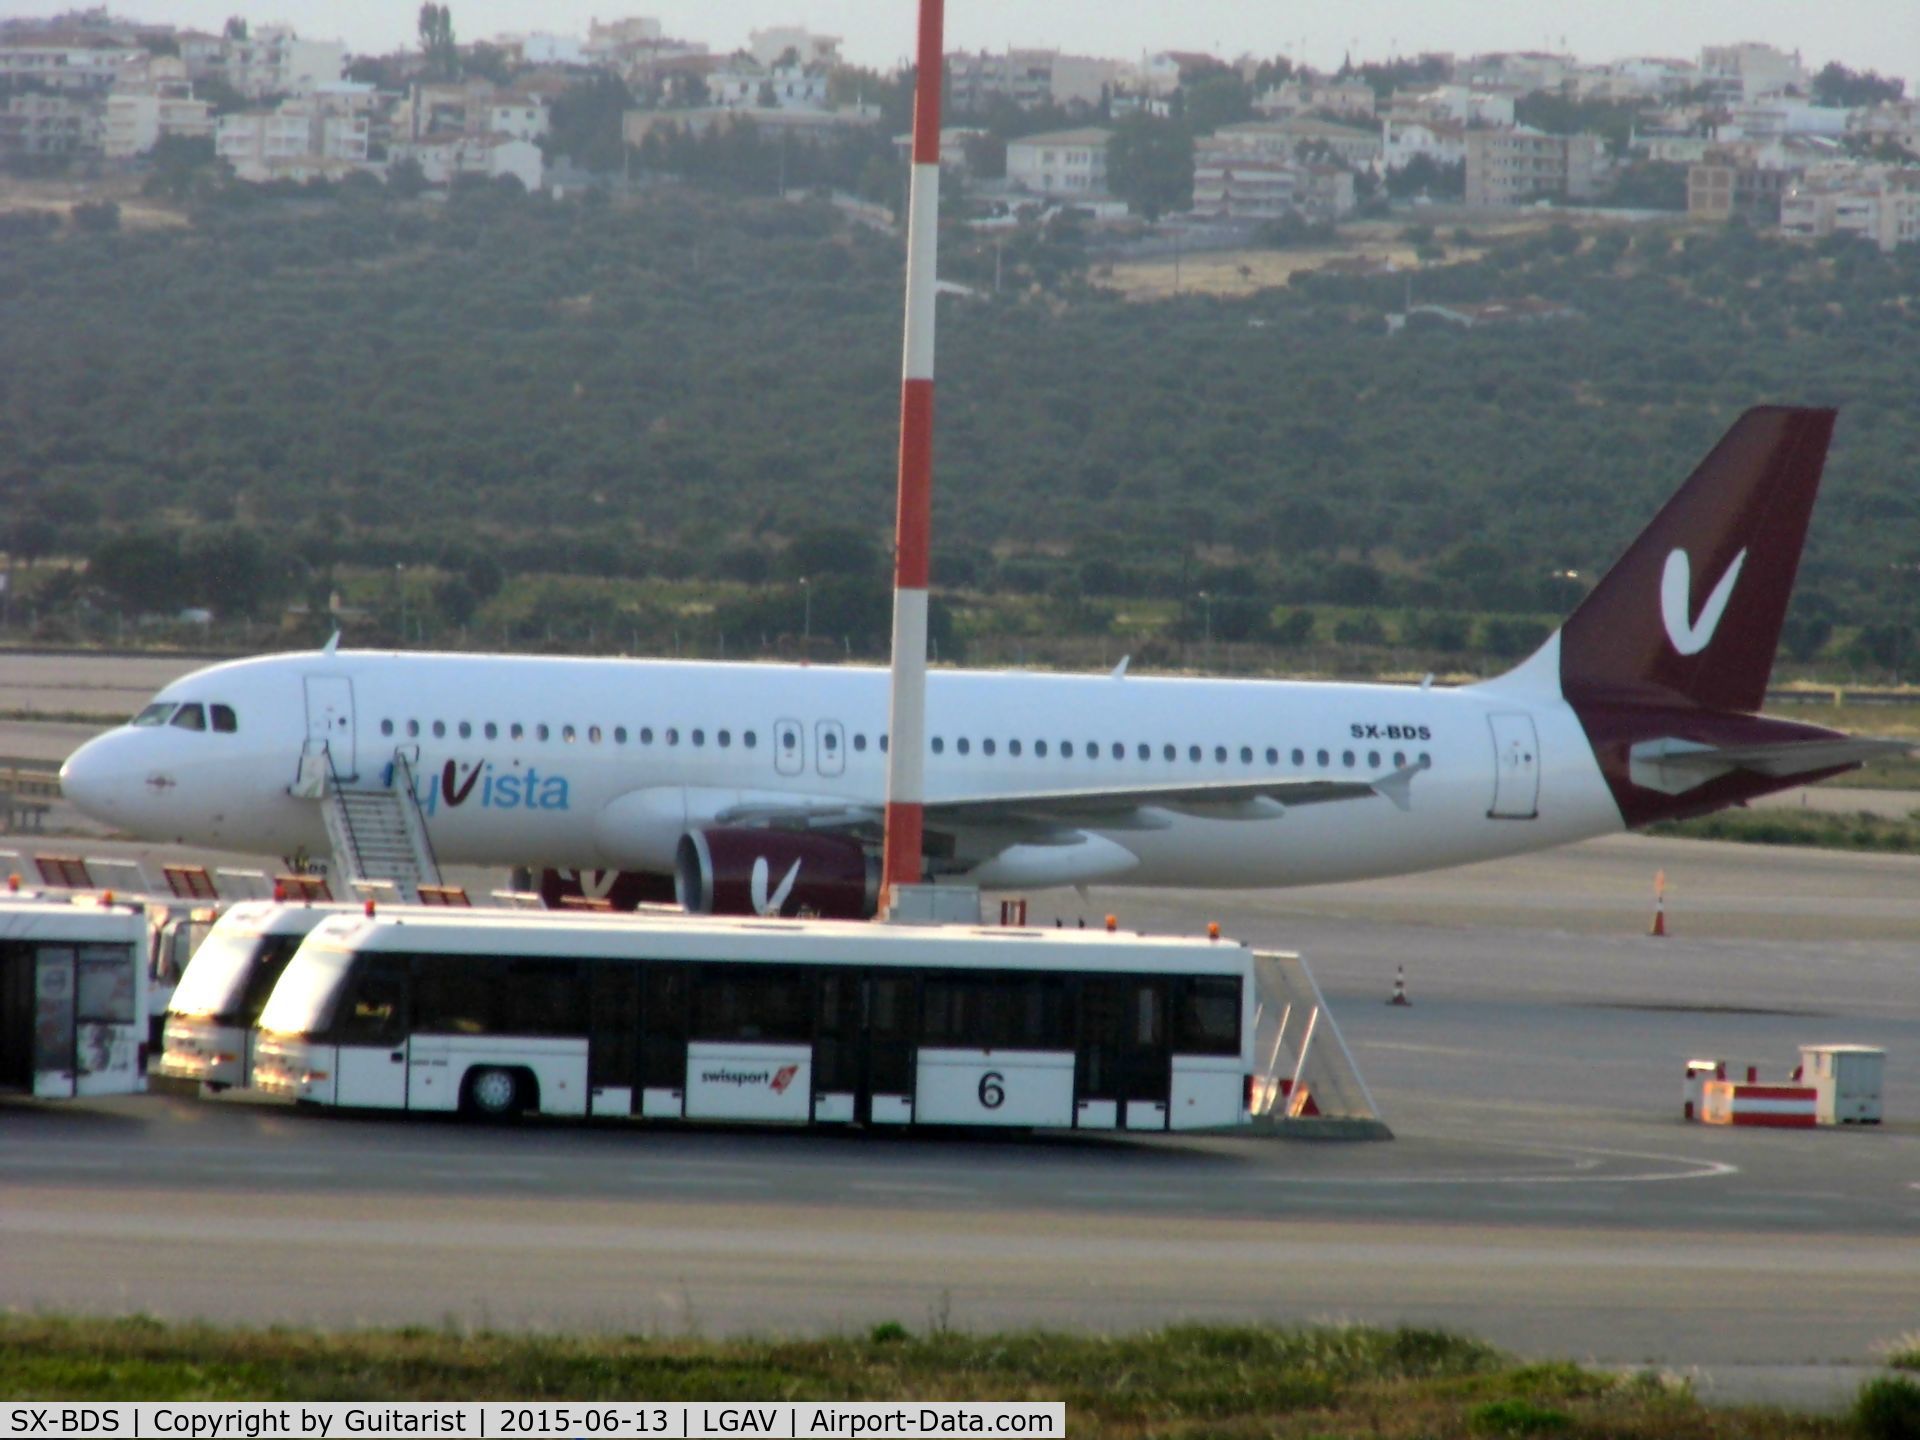 SX-BDS, 1998 Airbus A320-214 C/N 0879, At Athens